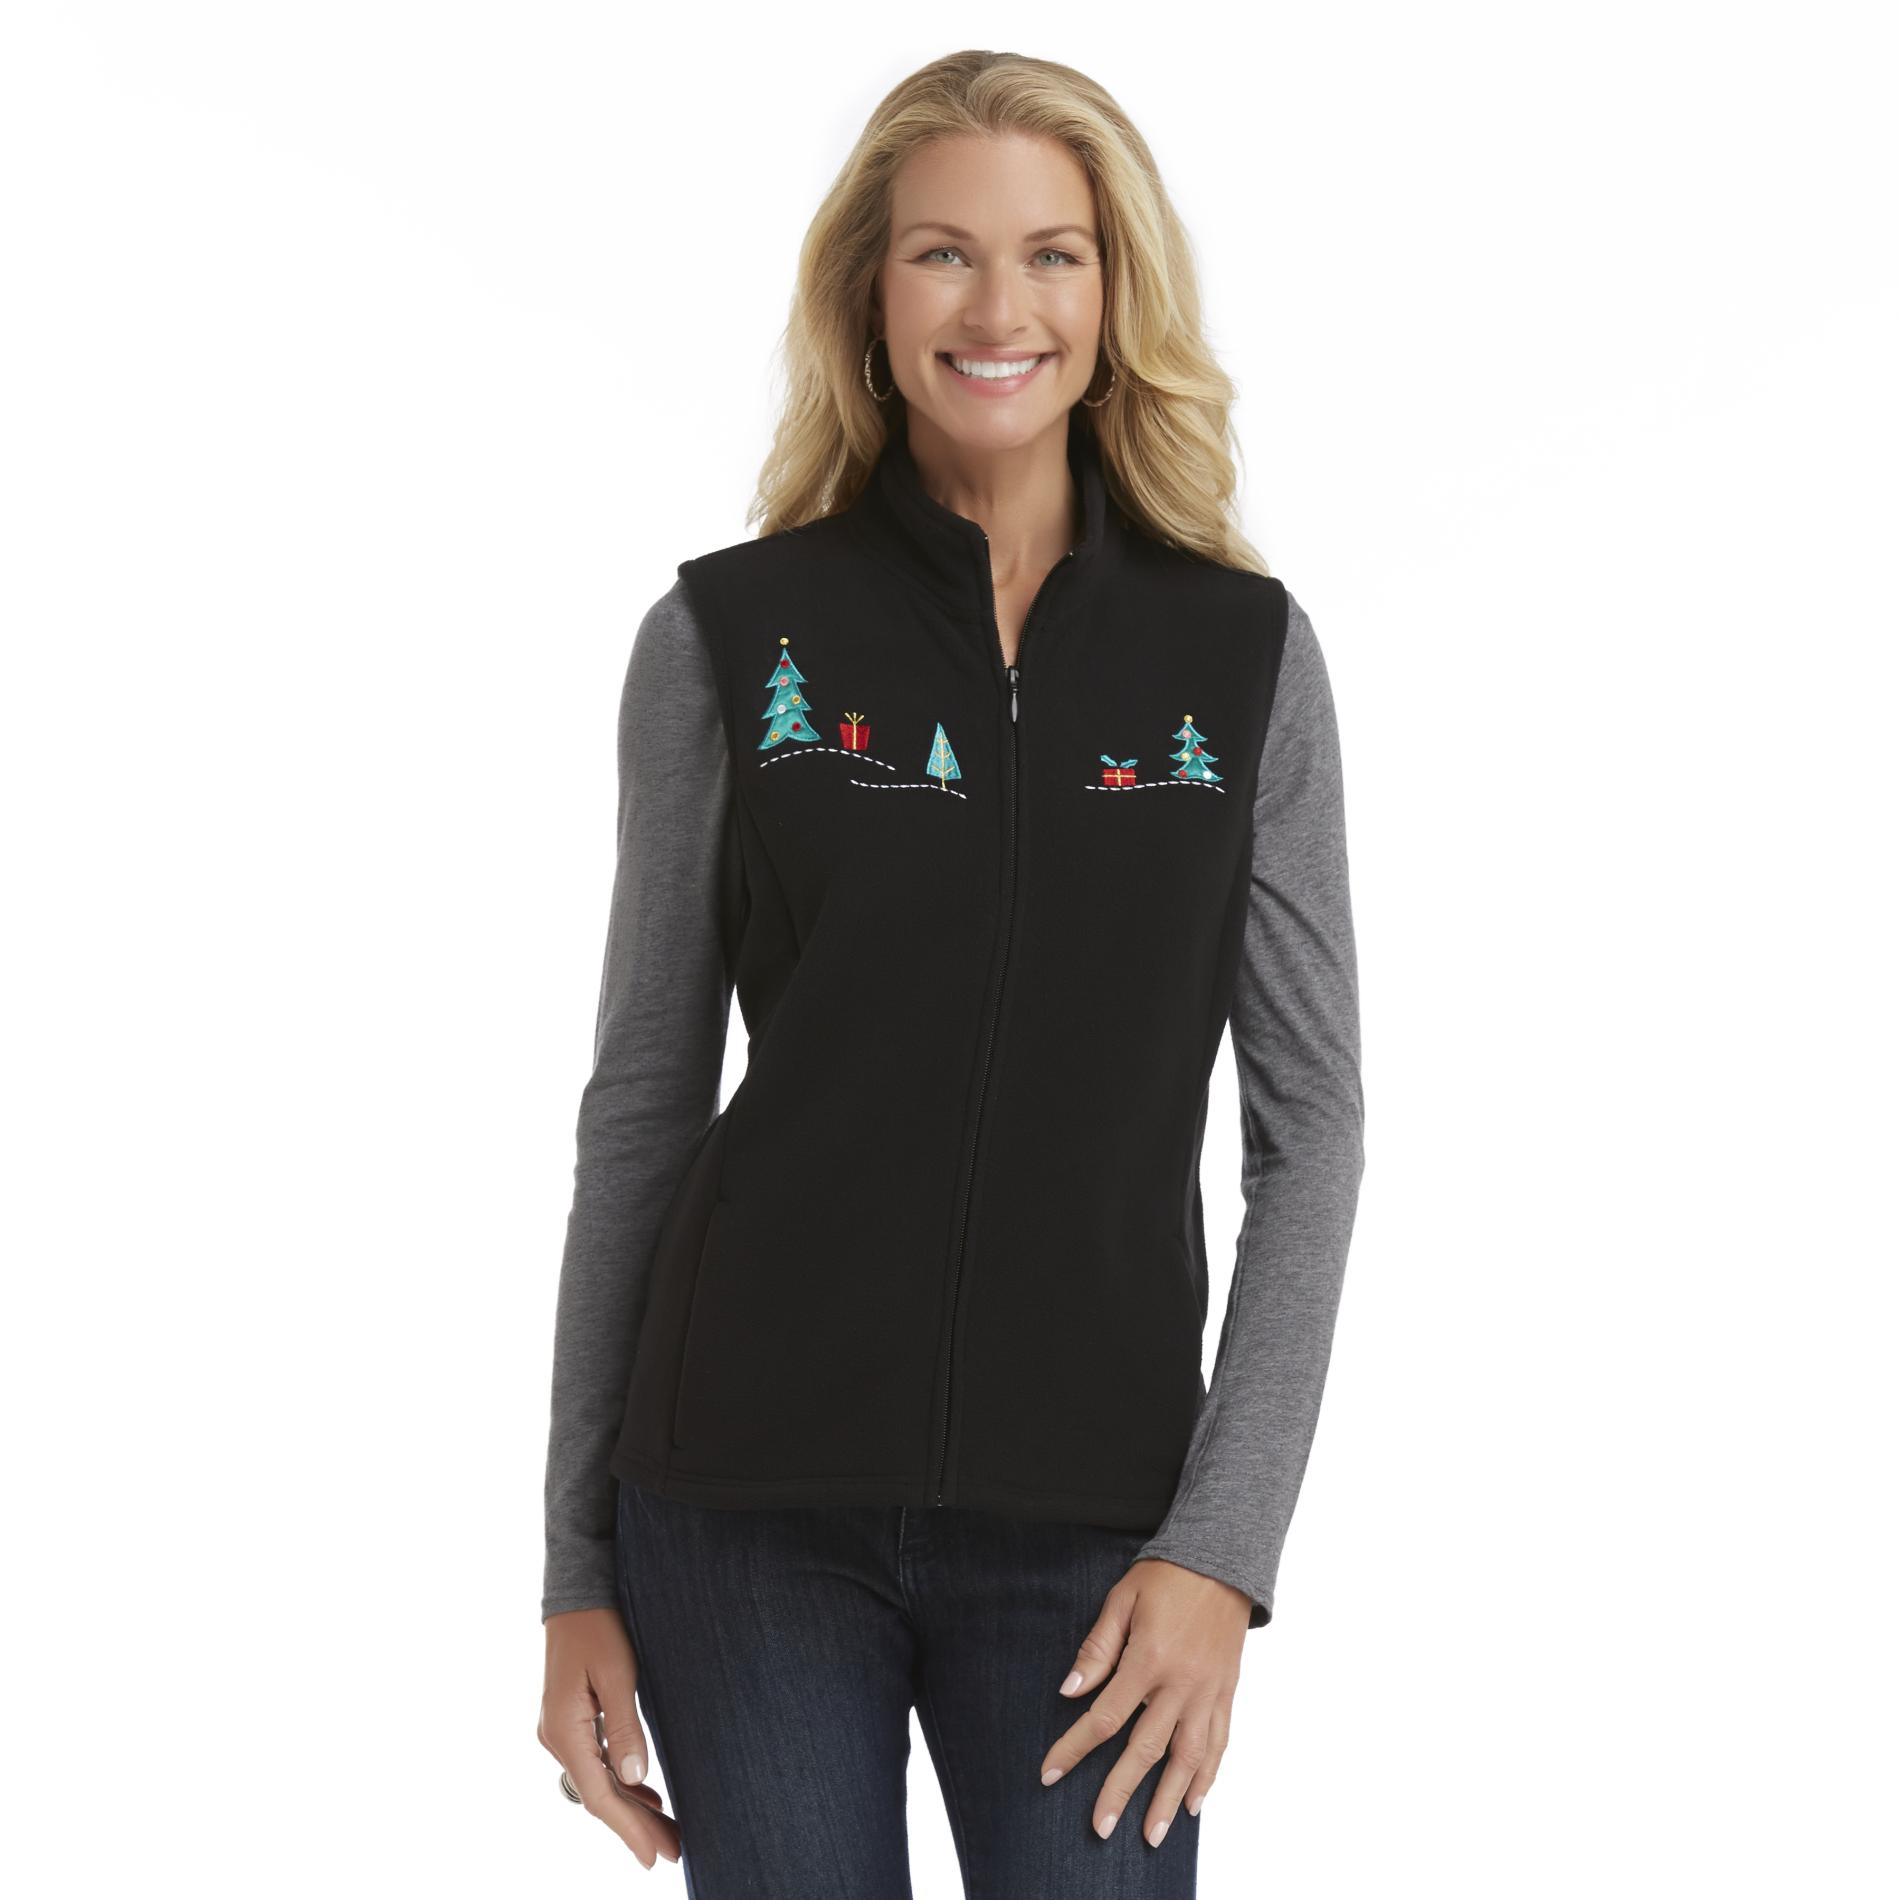 Holiday Editions Women's Fleece Holiday Vest - Christmas Trees